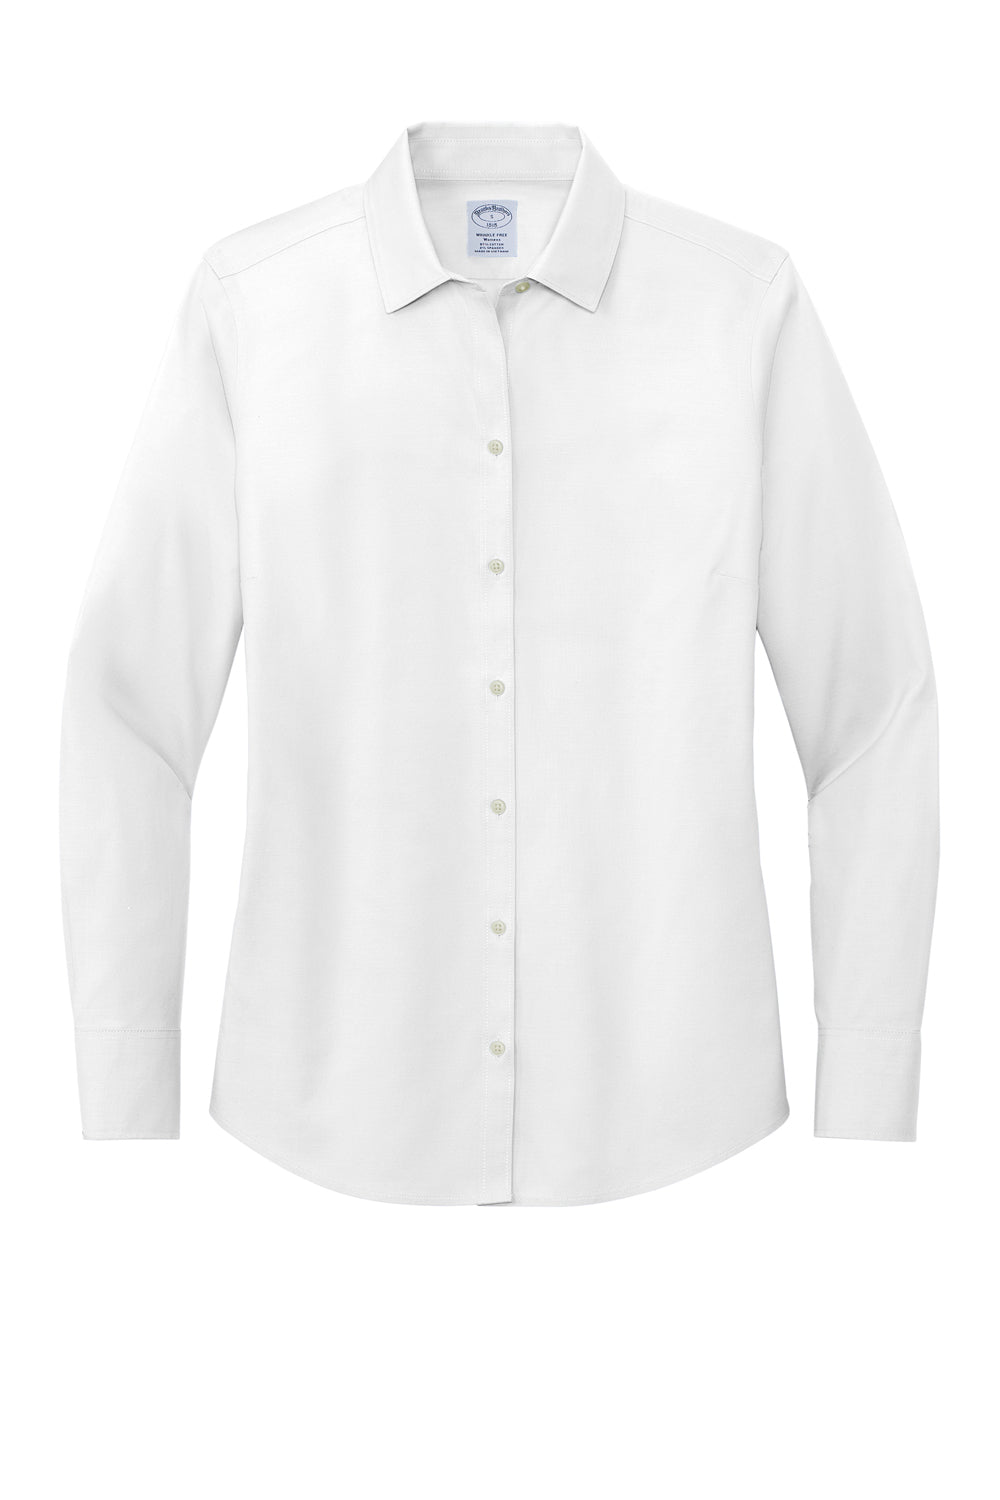 Brooks Brothers Womens Wrinkle Resistant Pinpoint Long Sleeve Button Down Shirt White Flat Front